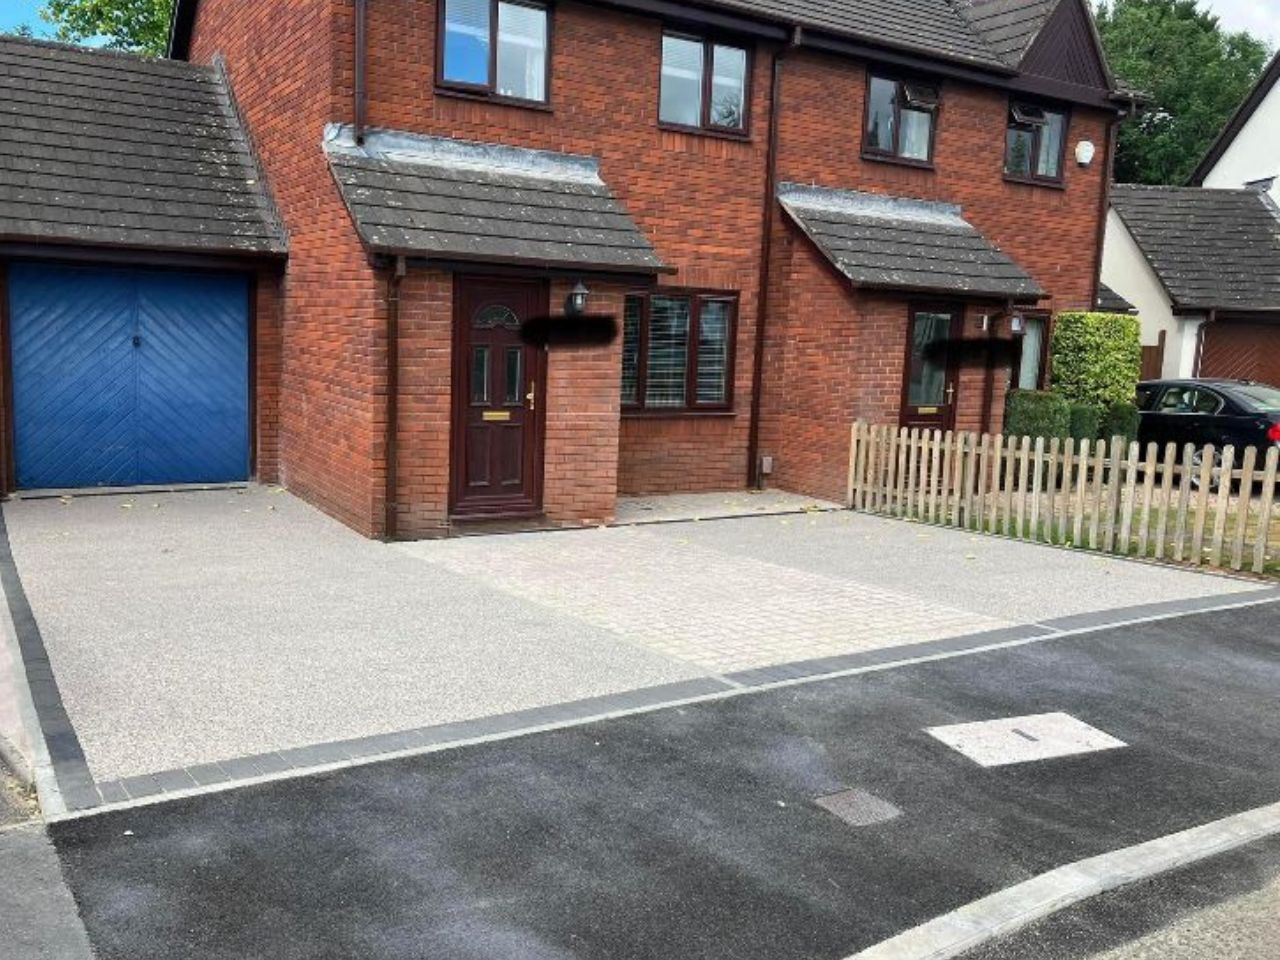 Cost of a resin driveway in Exeter.